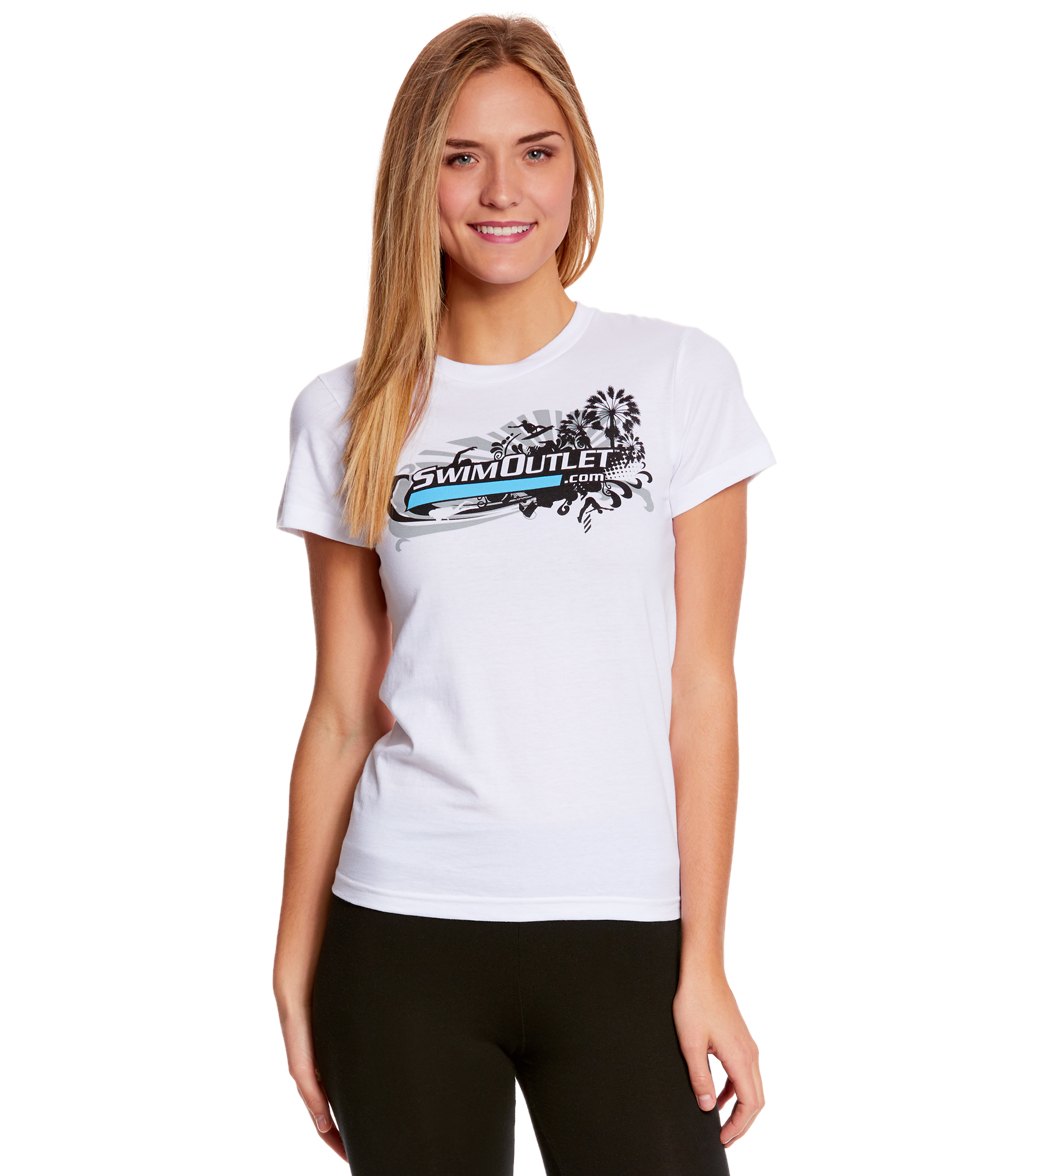 Women's Fitted Tee Shirt - White Small Cotton - Swimoutlet.com